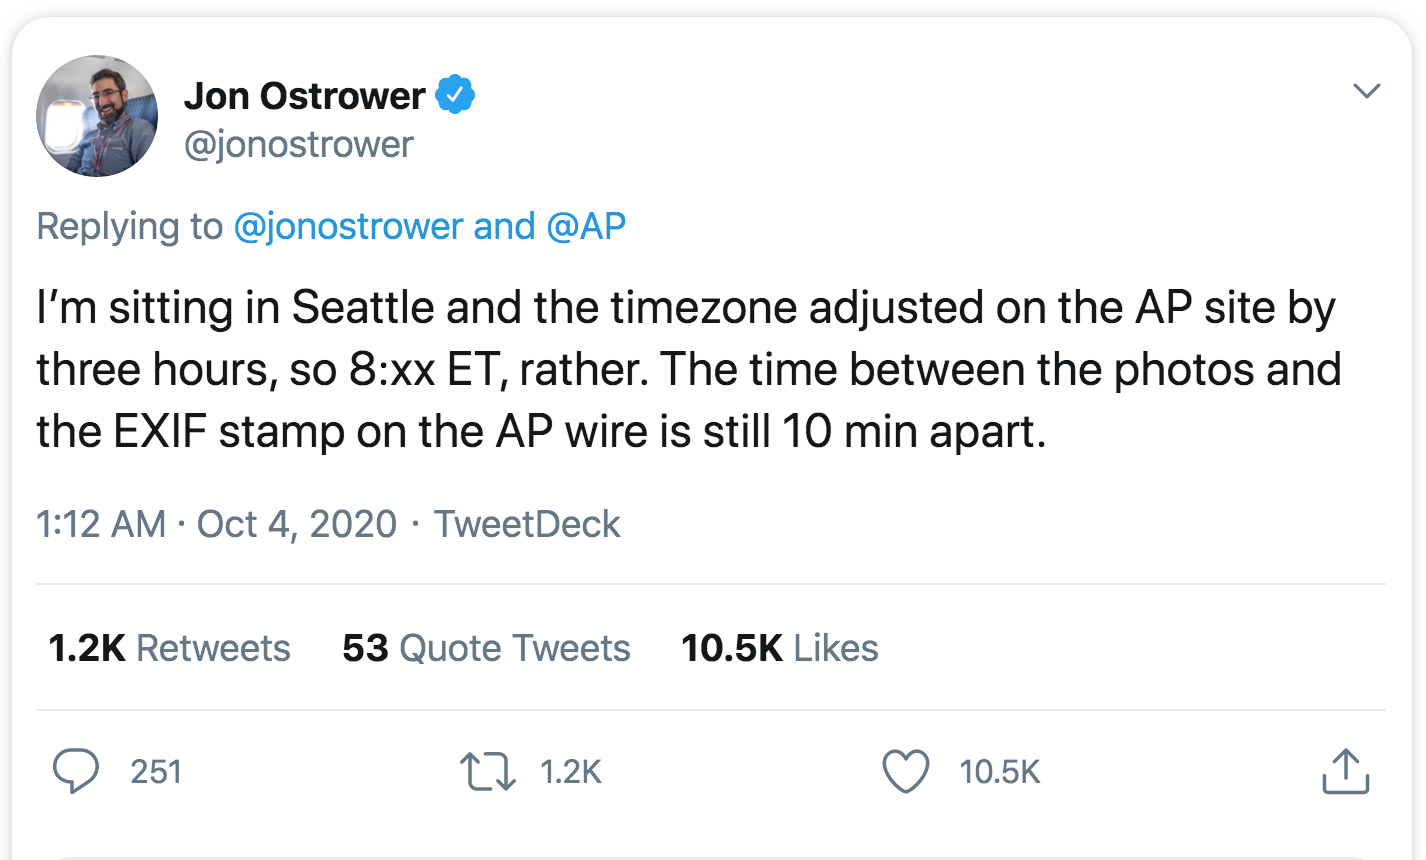 angle - Jon Ostrower and I'm sitting in Seattle and the timezone adjusted on the Ap site by three hours, so 8Xx Et, rather. The time between the photos and the Exif stamp on the Ap wire is still 10 min apart. TweetDeck 53 Quote Tweets 251 22 A